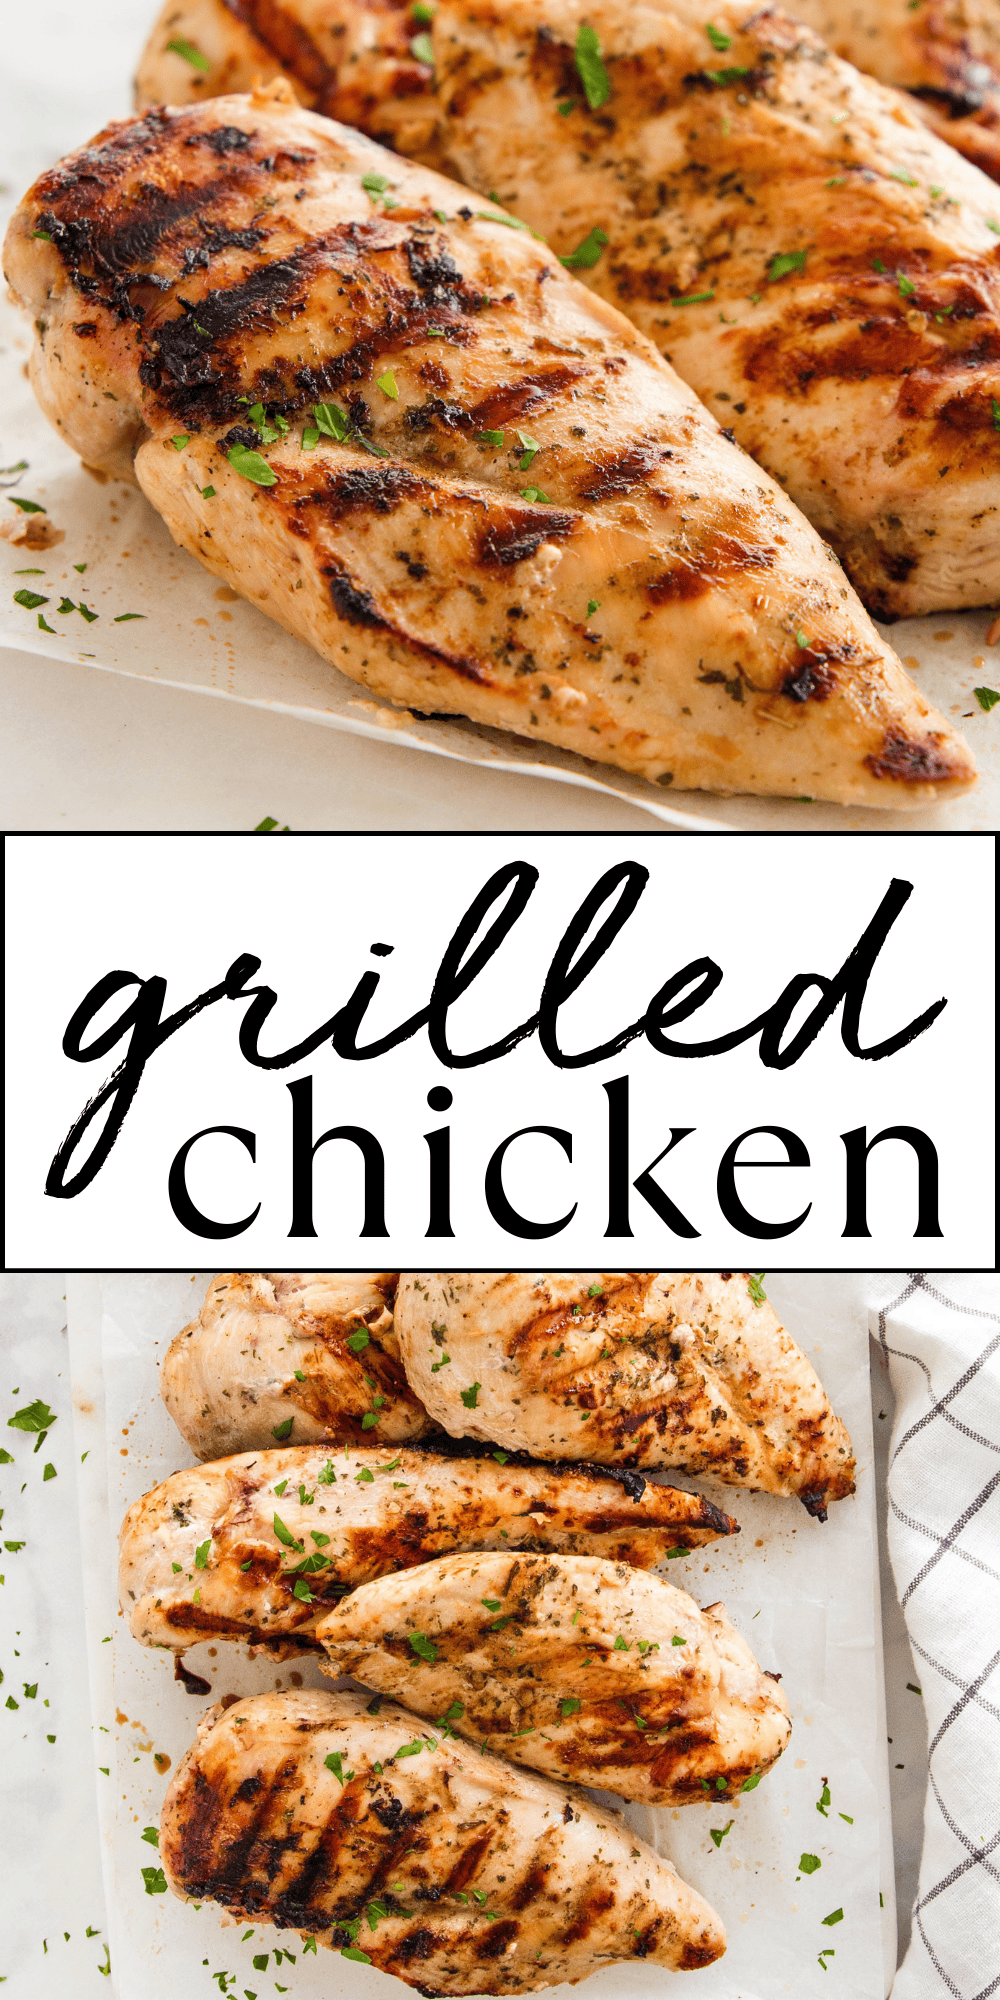 This Grilled Chicken recipe is the ultimate guide to the best juicy grilled chicken you'll ever taste! It's healthy, and quick & easy to make with a simple marinade for maximum flavour. Learn how to grill chicken so it's cooked perfectly every single time and NEVER dry! Recipe from thebusybaker.ca! #grilledchicken #healthychicken #healthyrecipe #healthjourney #health #lowfat #leanprotein #protein #grilling #summerrecipe via @busybakerblog